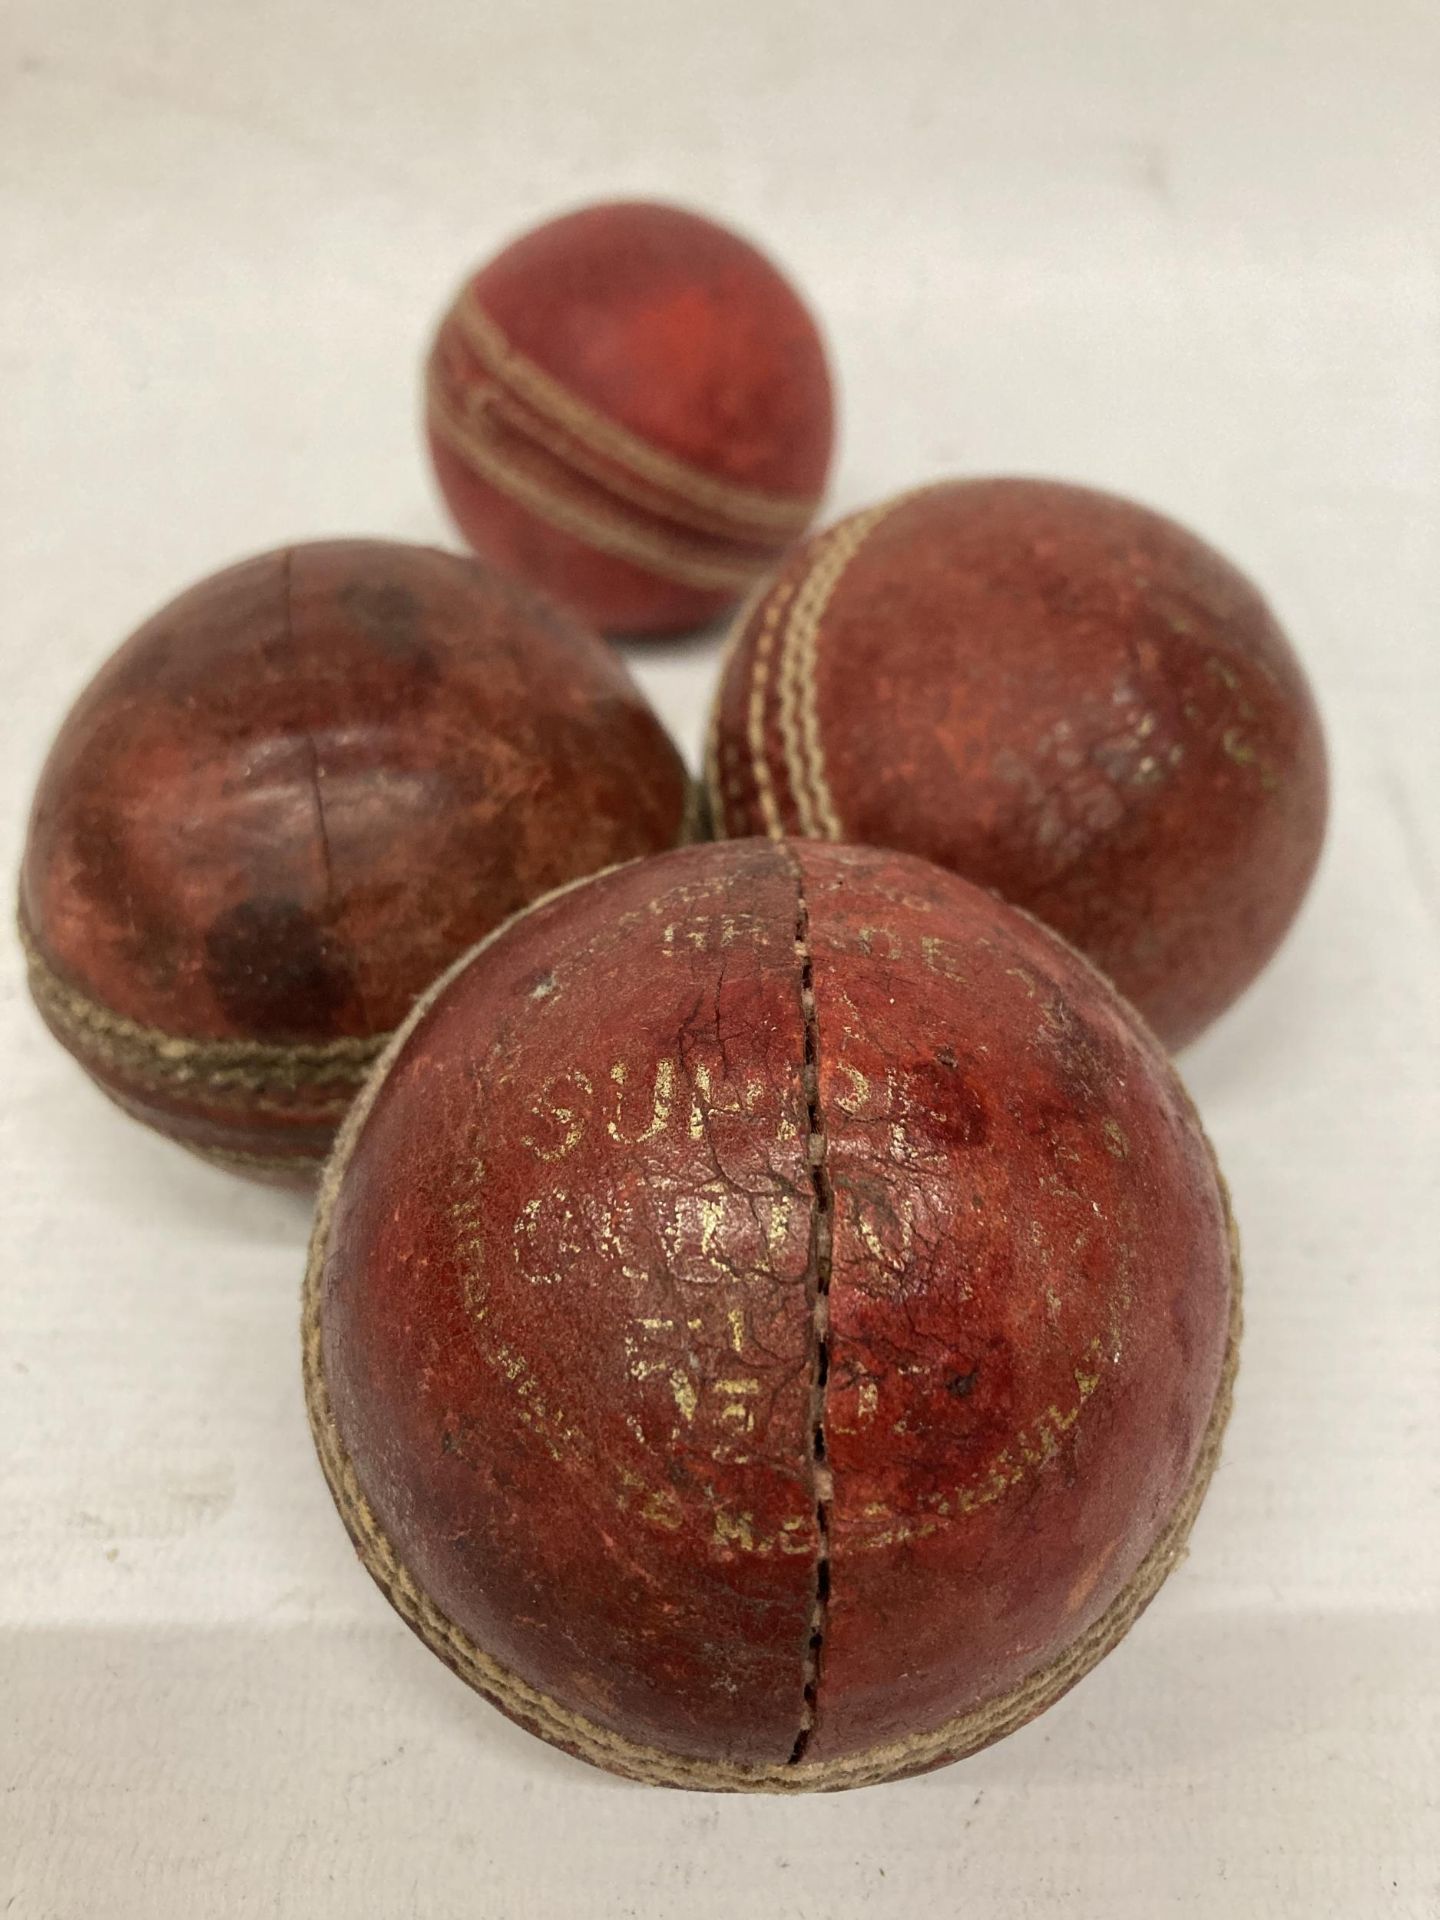 A COLLECTION OF VINTAGE SPORTING ITEMS, SPALDING RUGBY BALL, CRICKET BALLS AND A TAMBORINE - Image 5 of 5